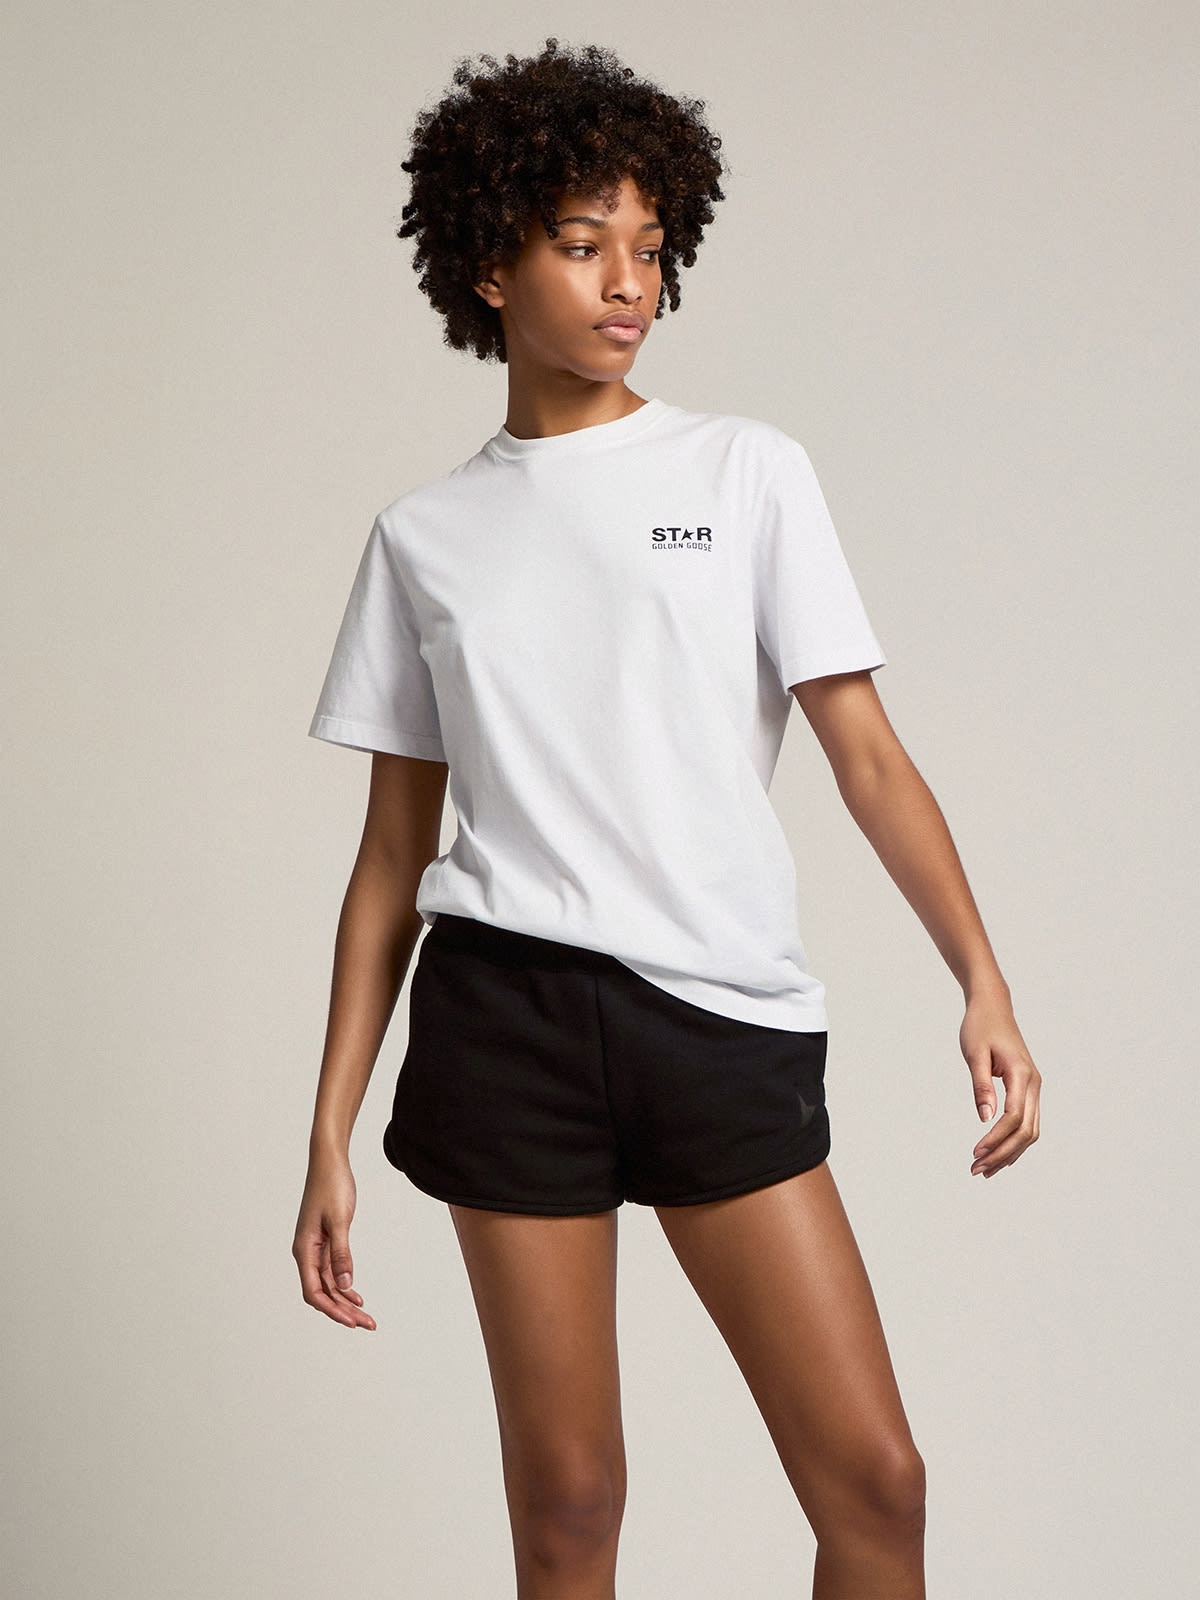 Women's white T-shirt with contrasting black logo and star - 4